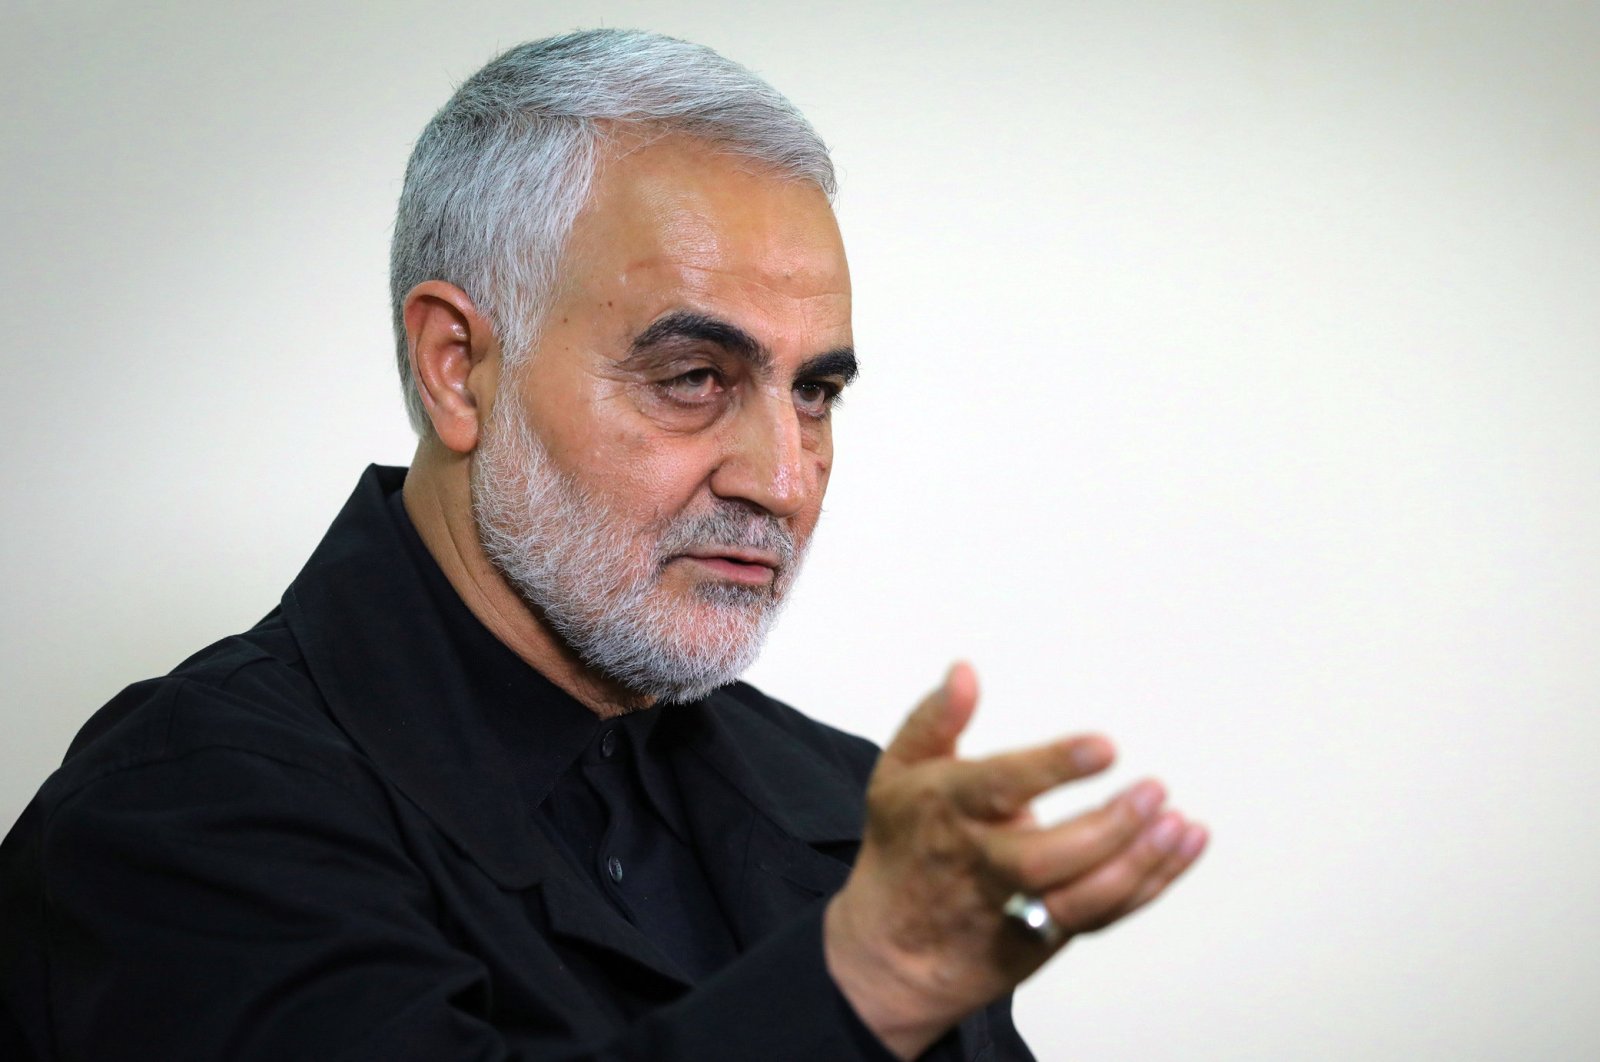 Qasem Soleimani, Iranian Revolutionary Guards Corps (IRGC) major general and commander of the Quds Force, speaks during an interview with members of the Iranian leader's bureau, Tehran, Dec. 1, 2019. (AFP Photo)